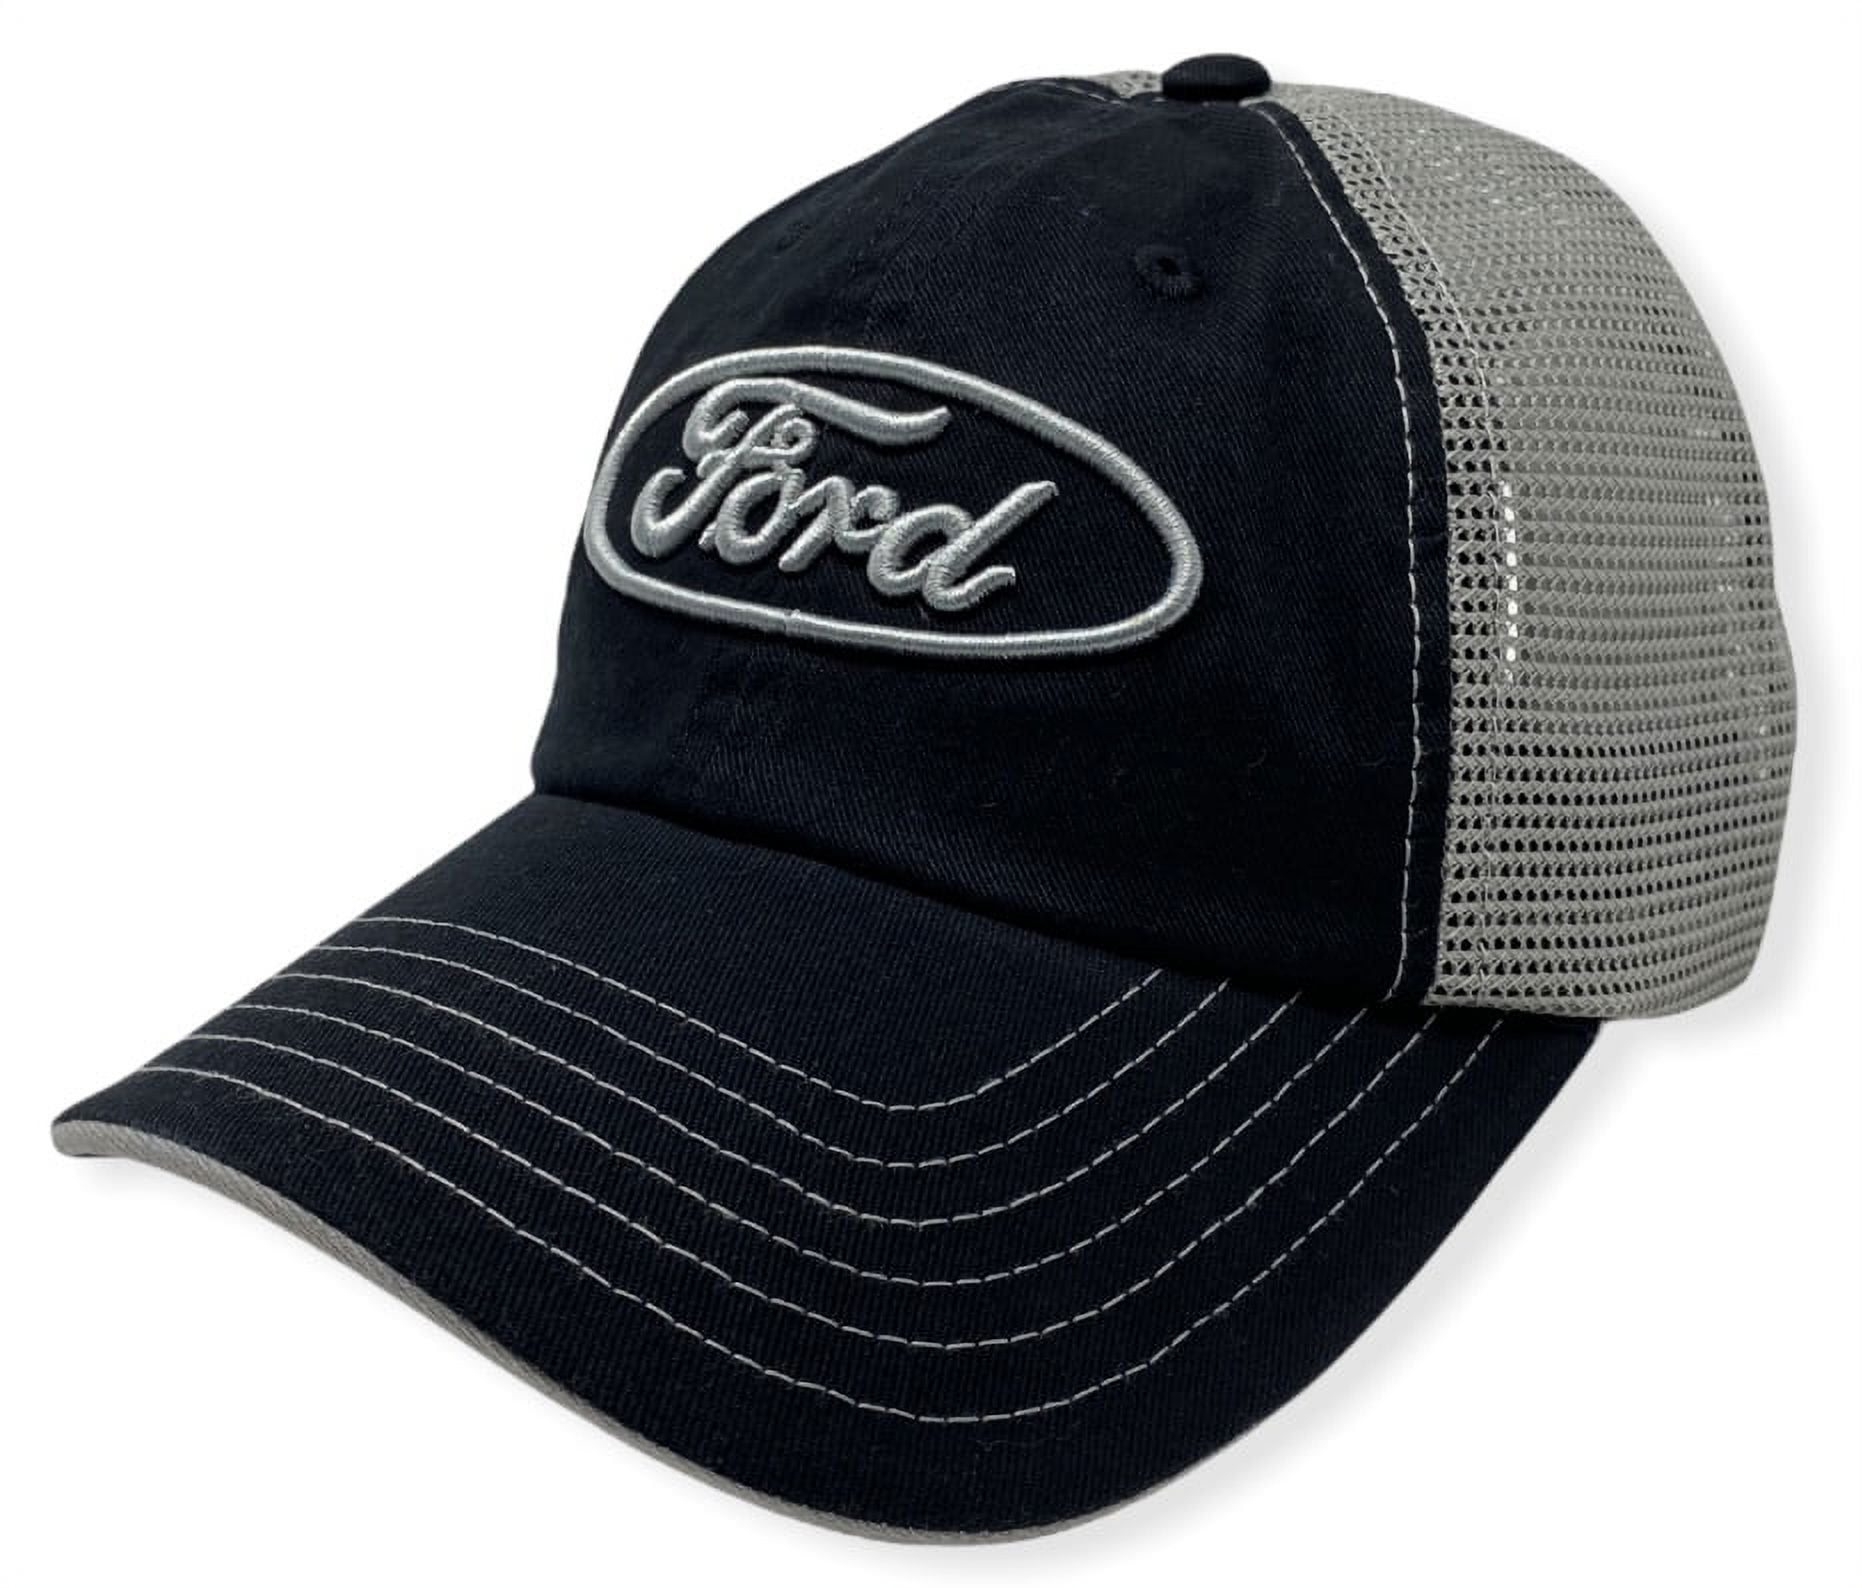 Mesh Hats and Caps - Embroidered Mesh Hats with Logo